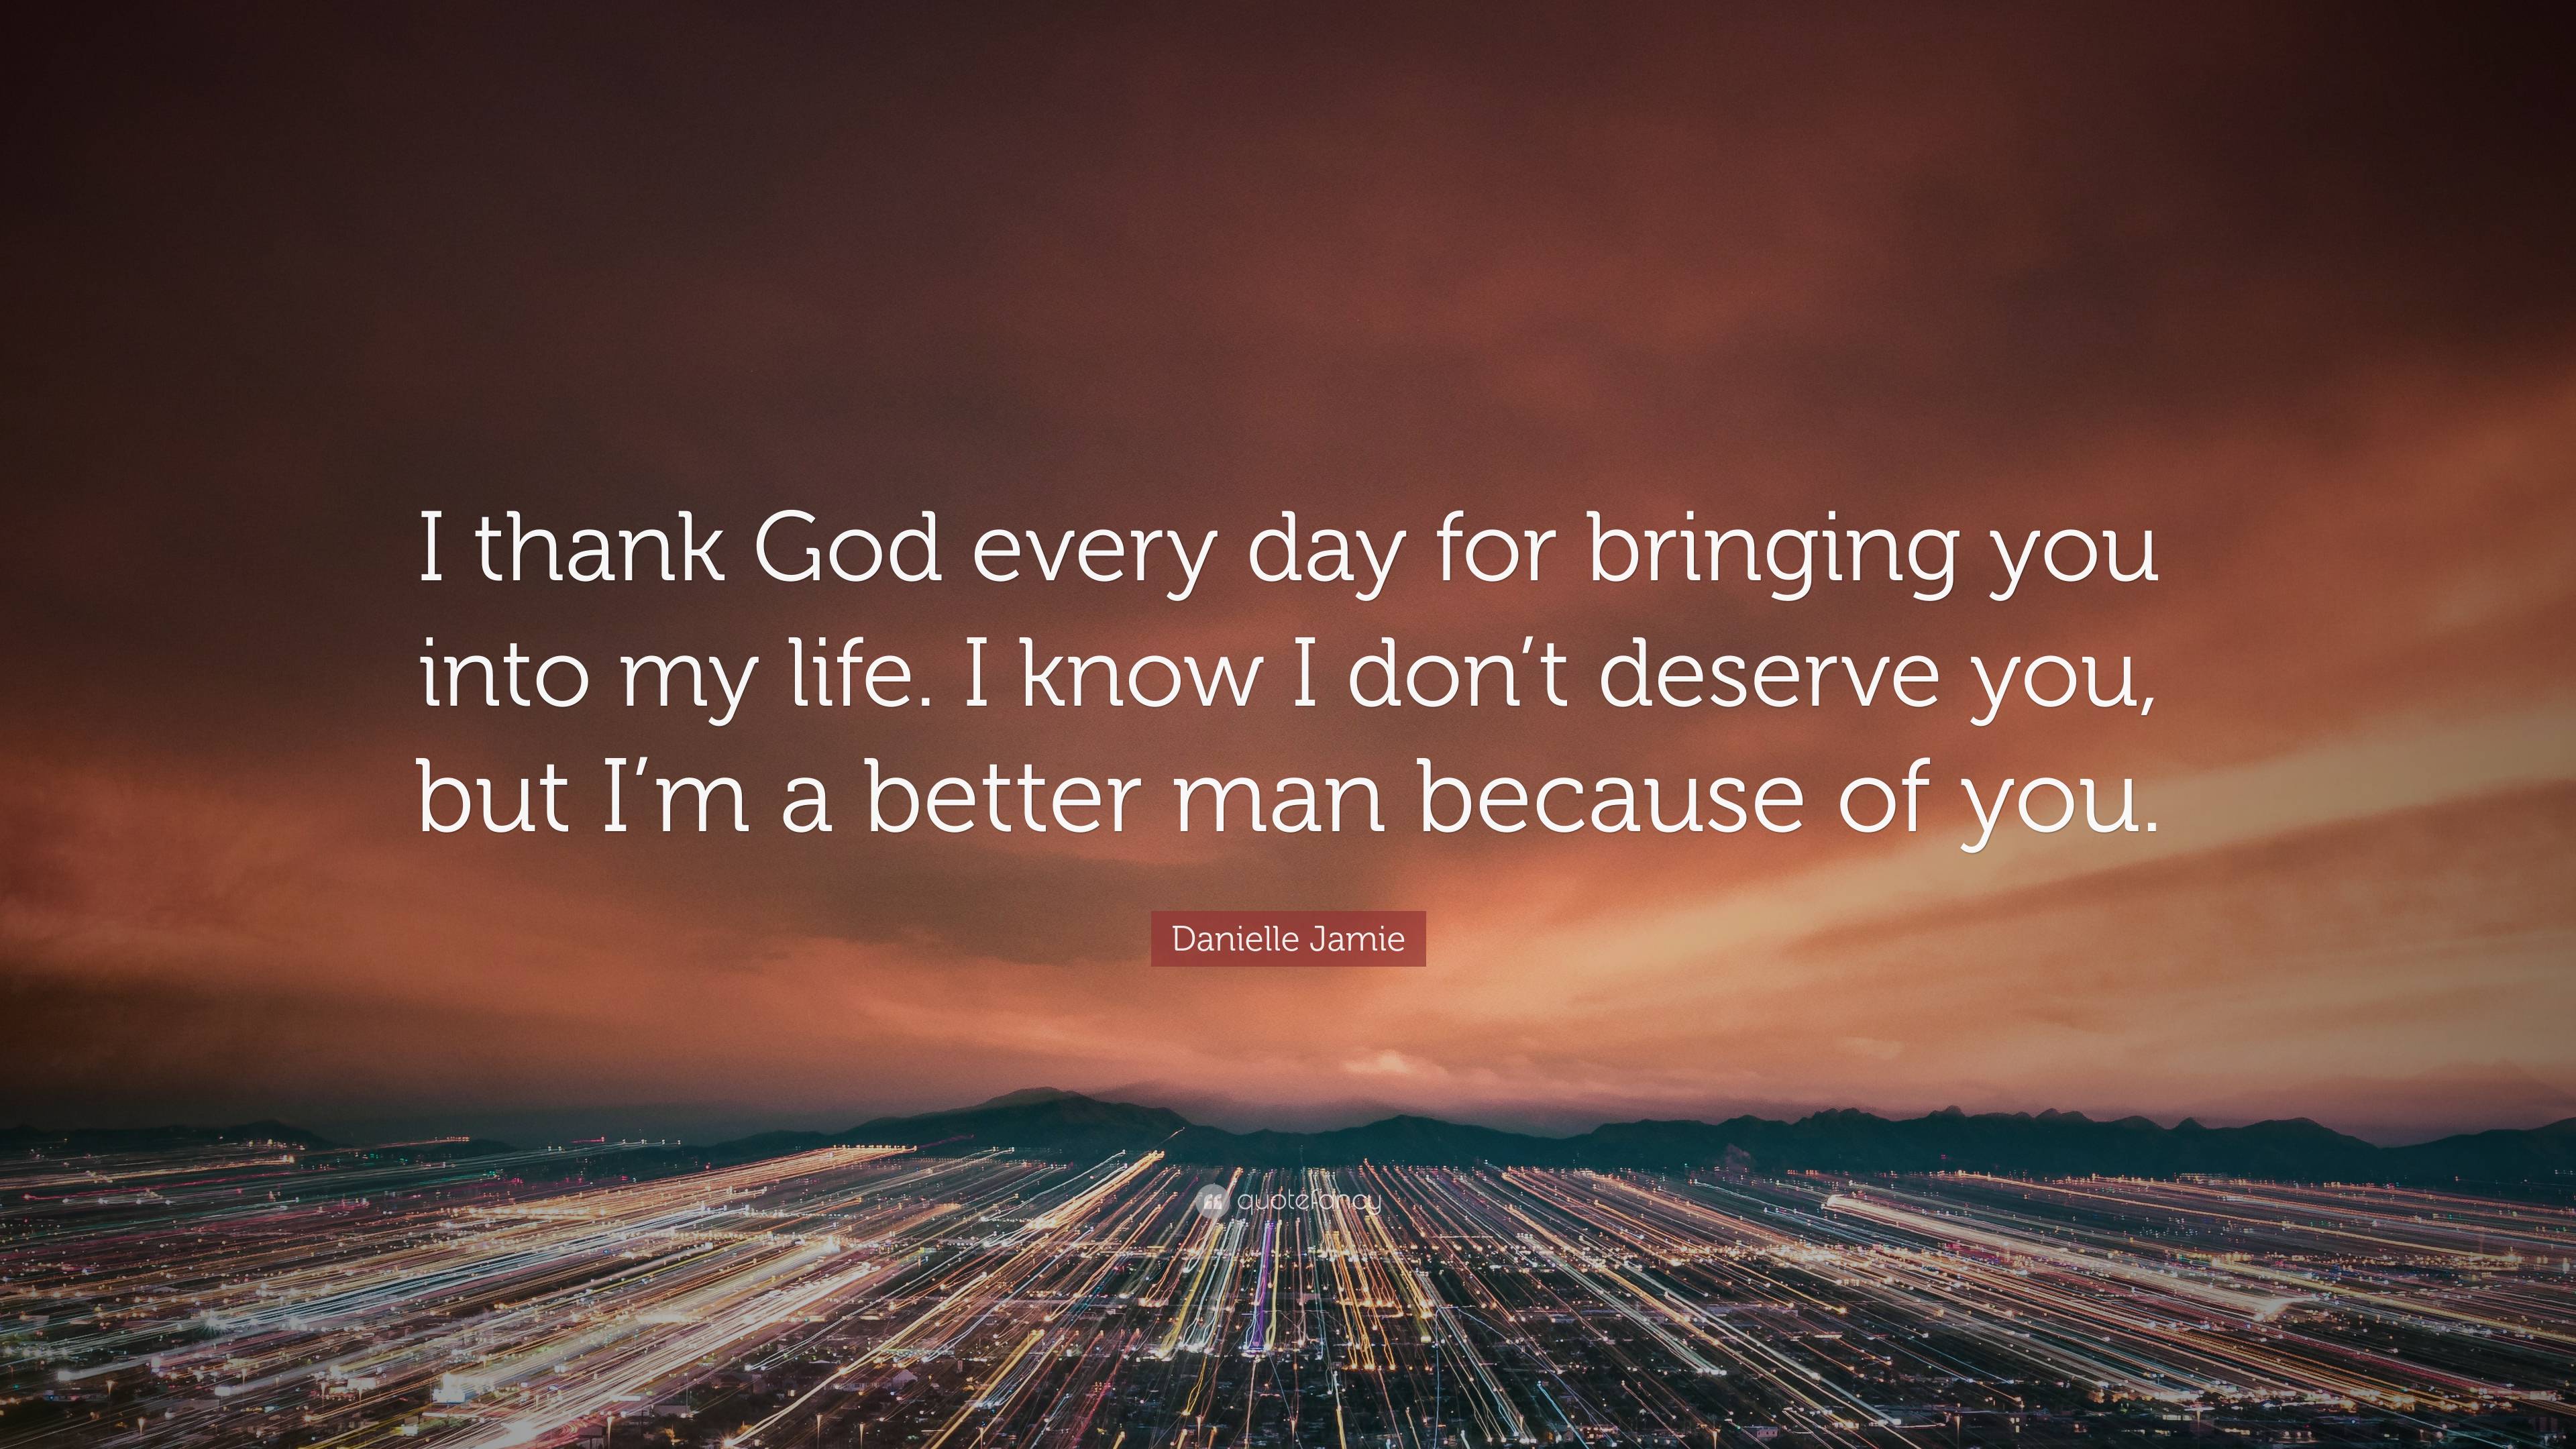 Danielle Jamie Quote: “I thank God every day for bringing you into